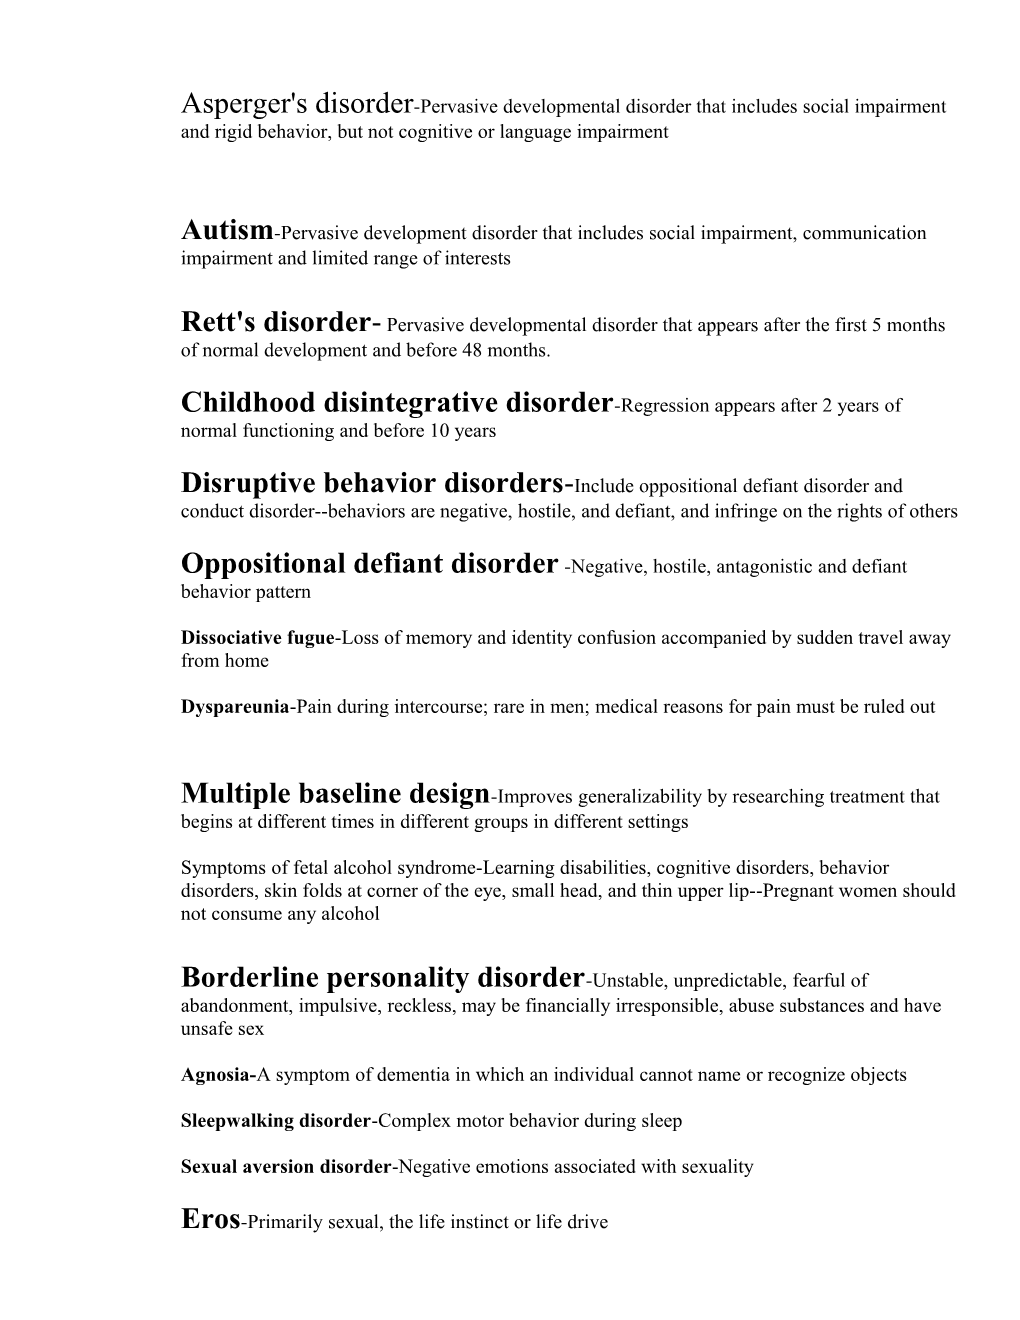 Axis I-All Mental Disorders, Except Developmental Disorders And Personality Disorders (DSM-IV)